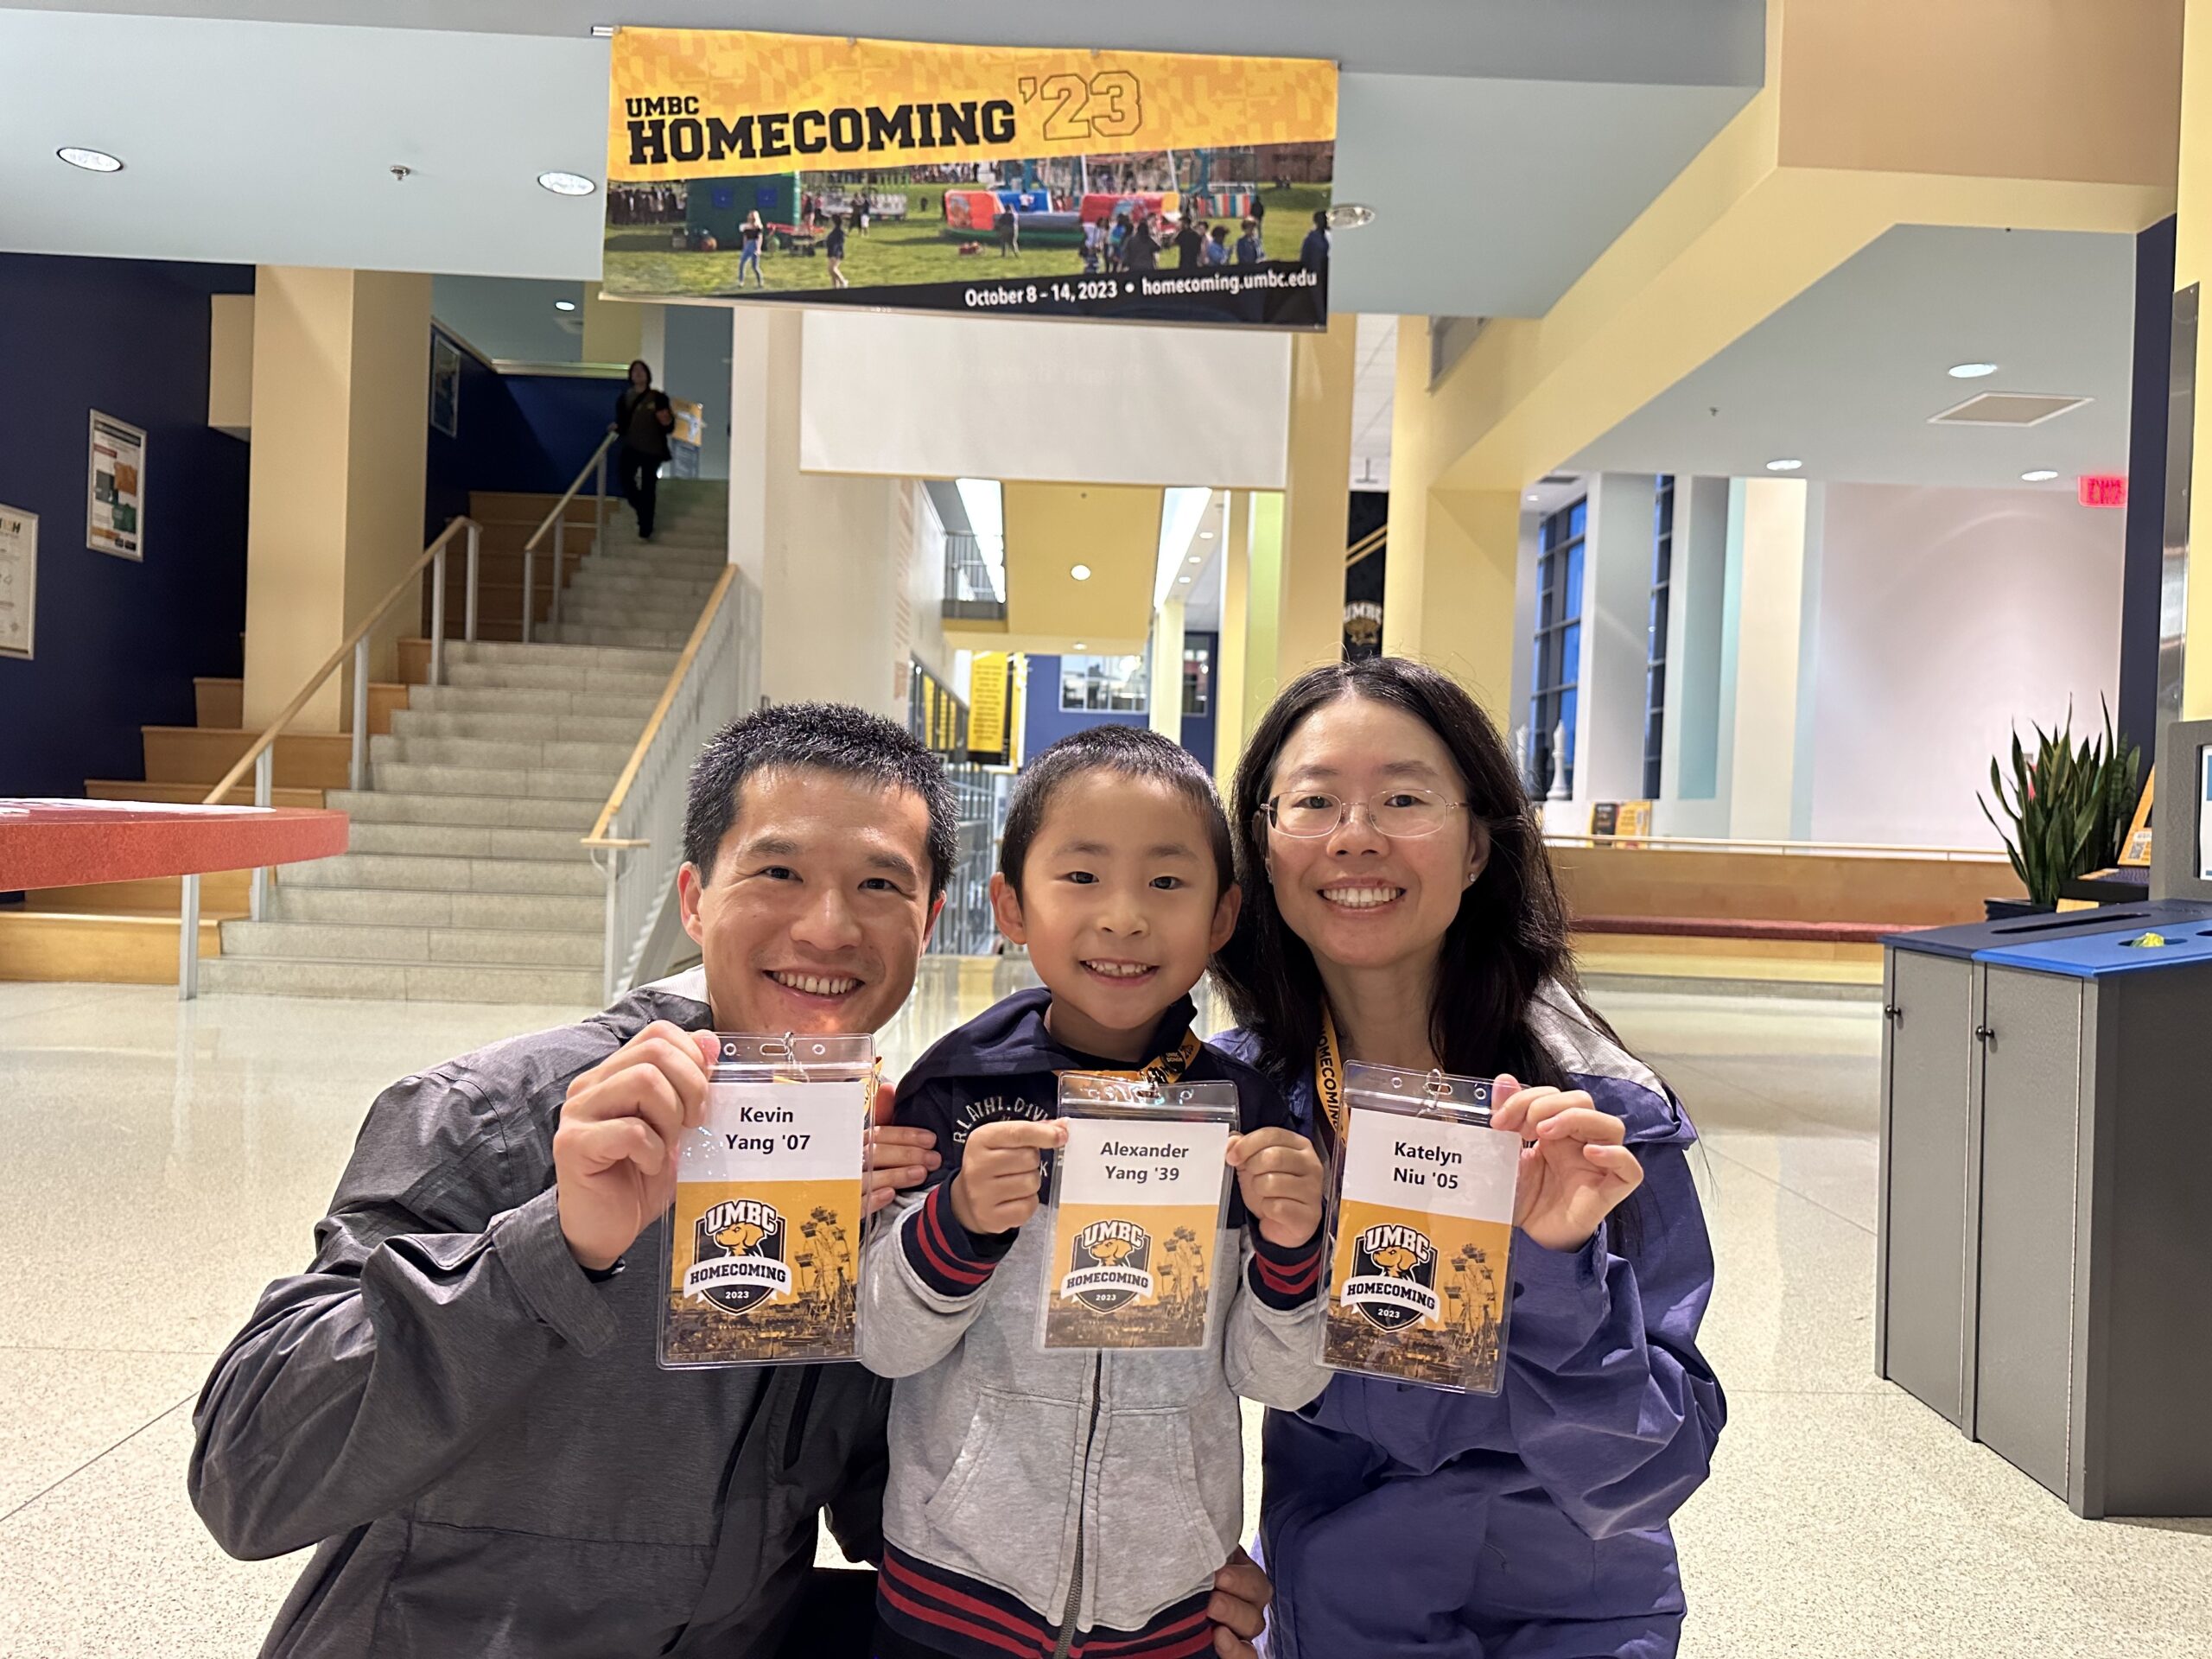 Kevin Yang '07, Katelyn Niu '05, and their son holding up their Homecoming 2023 nametags.